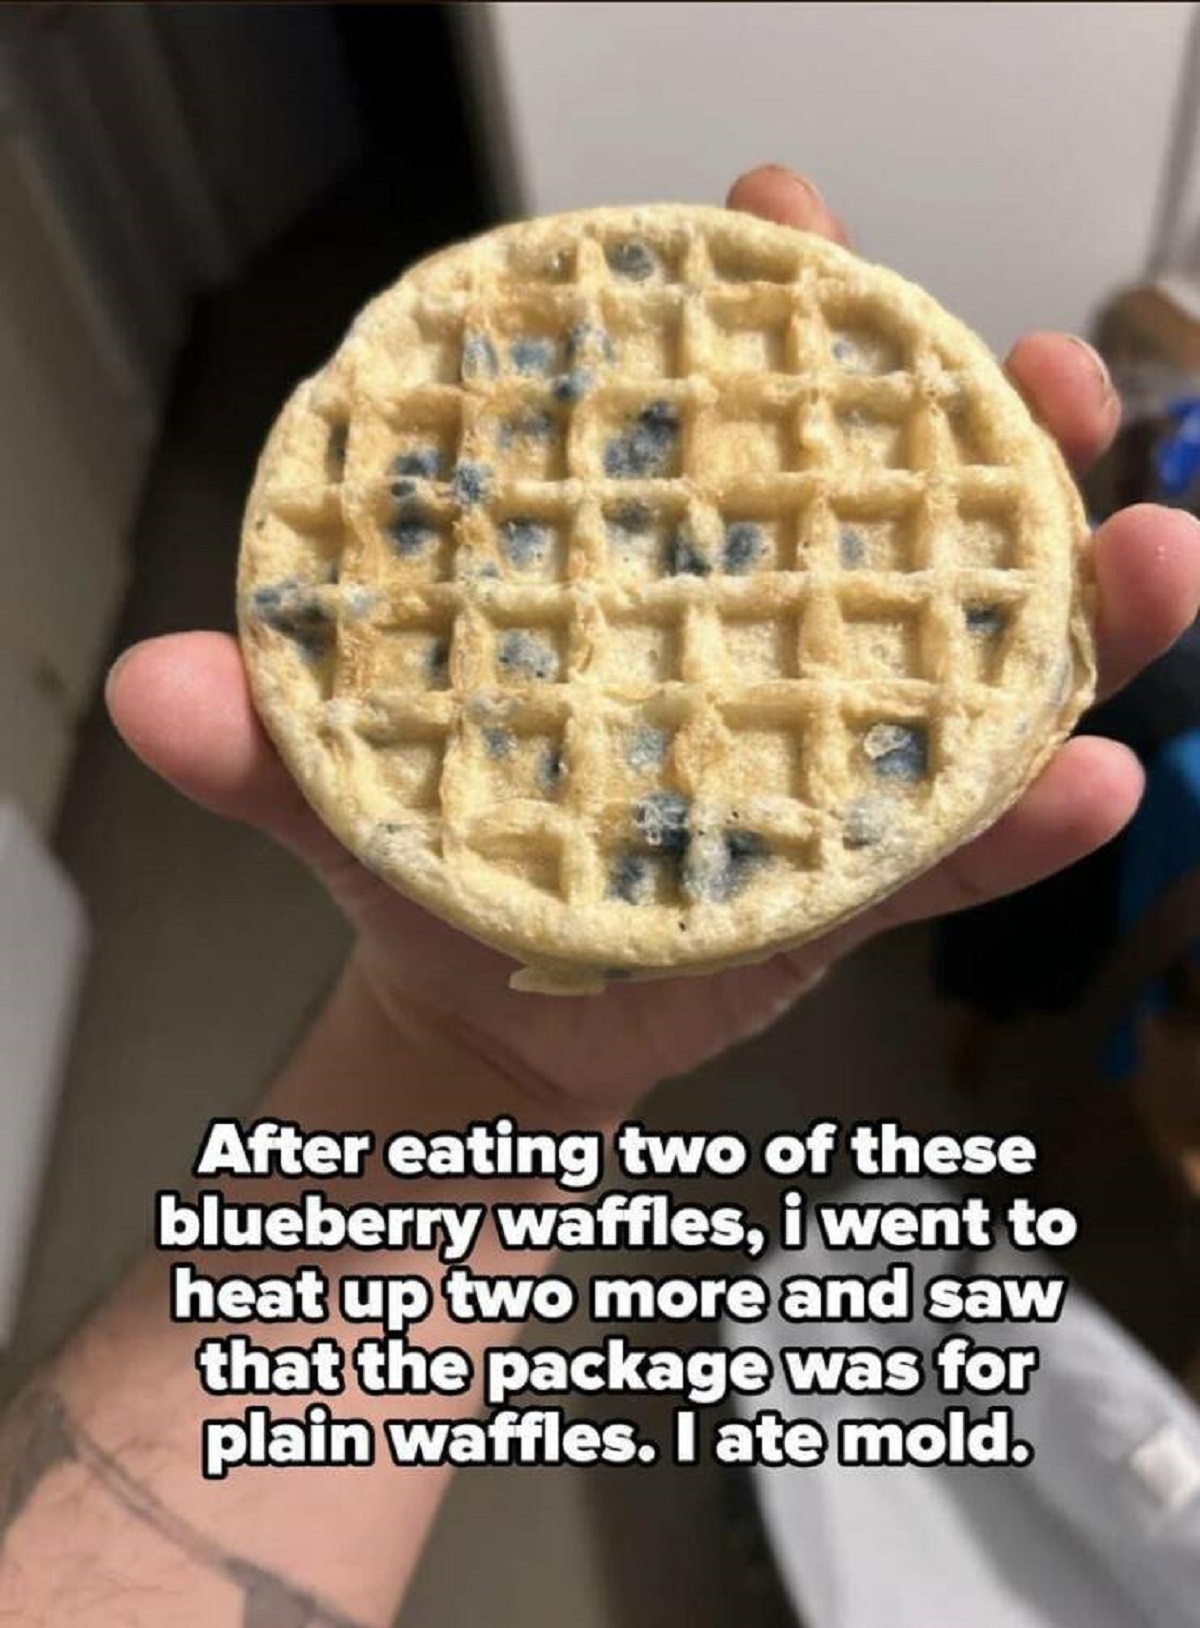 moldy blueberry waffles - After eating two of these blueberry waffles, i went to heat up two more and saw that the package was for plain waffles. I ate mold.